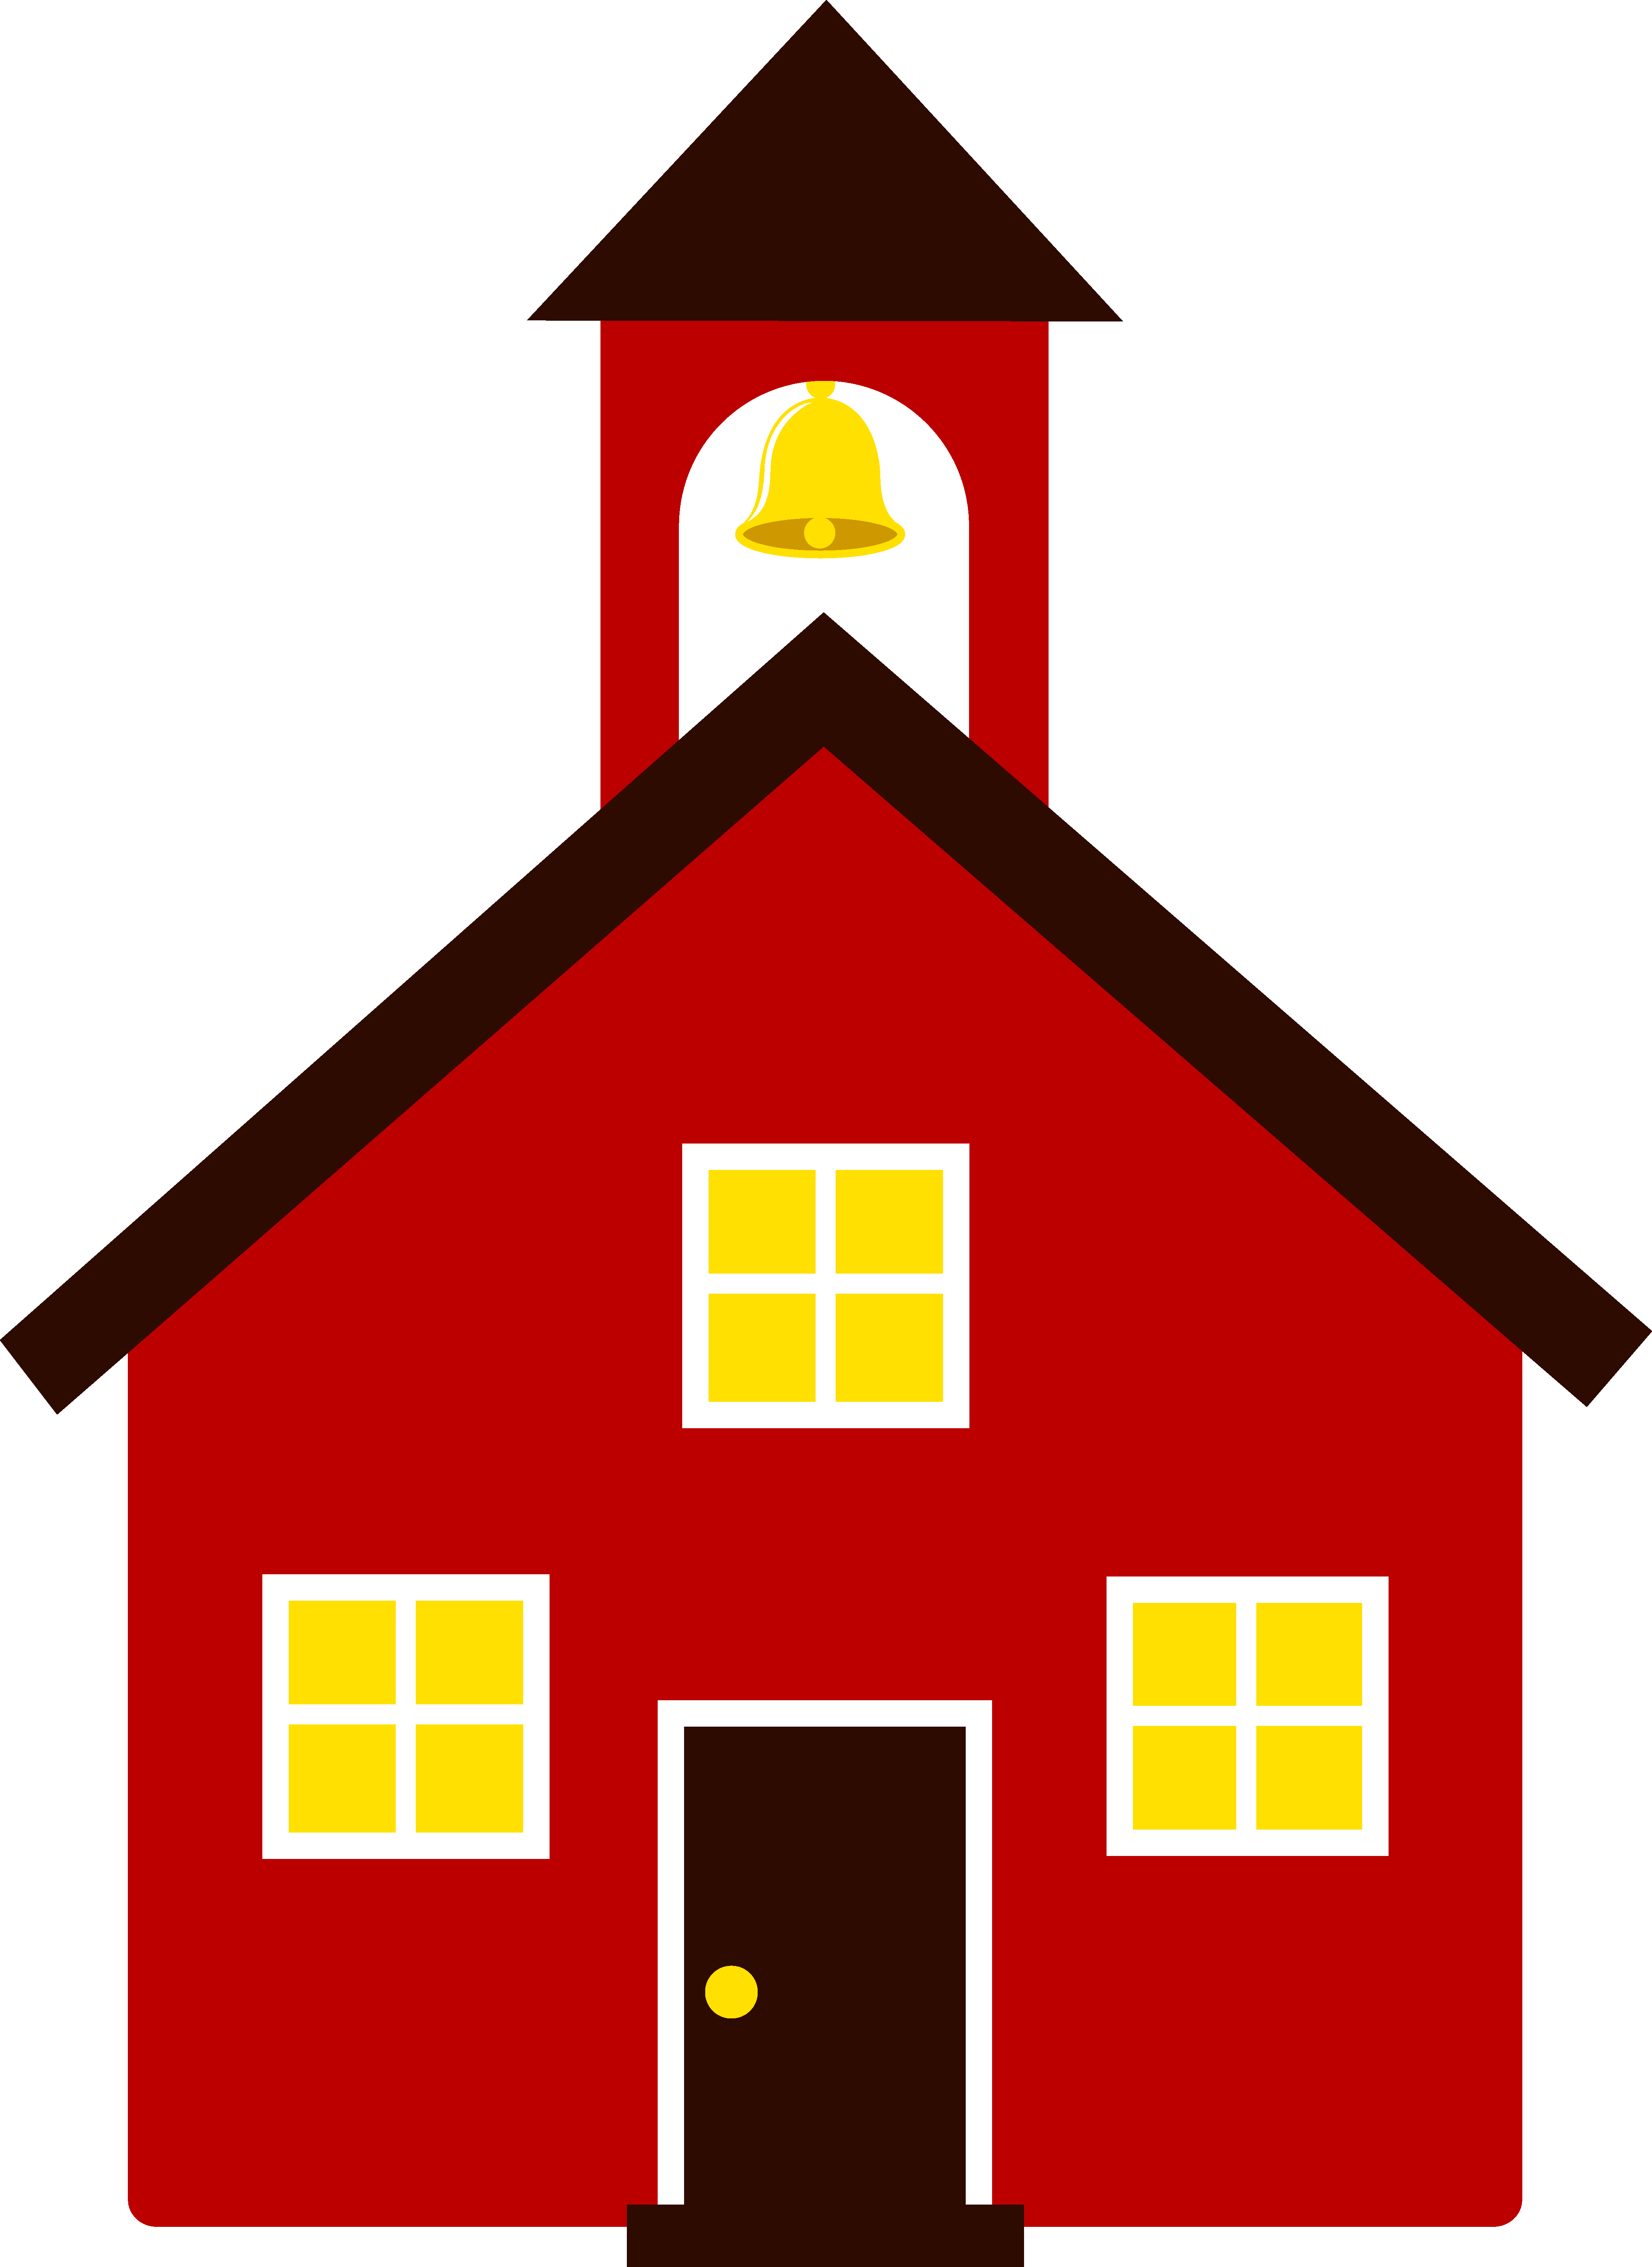 School House Images - Free Clipart Images